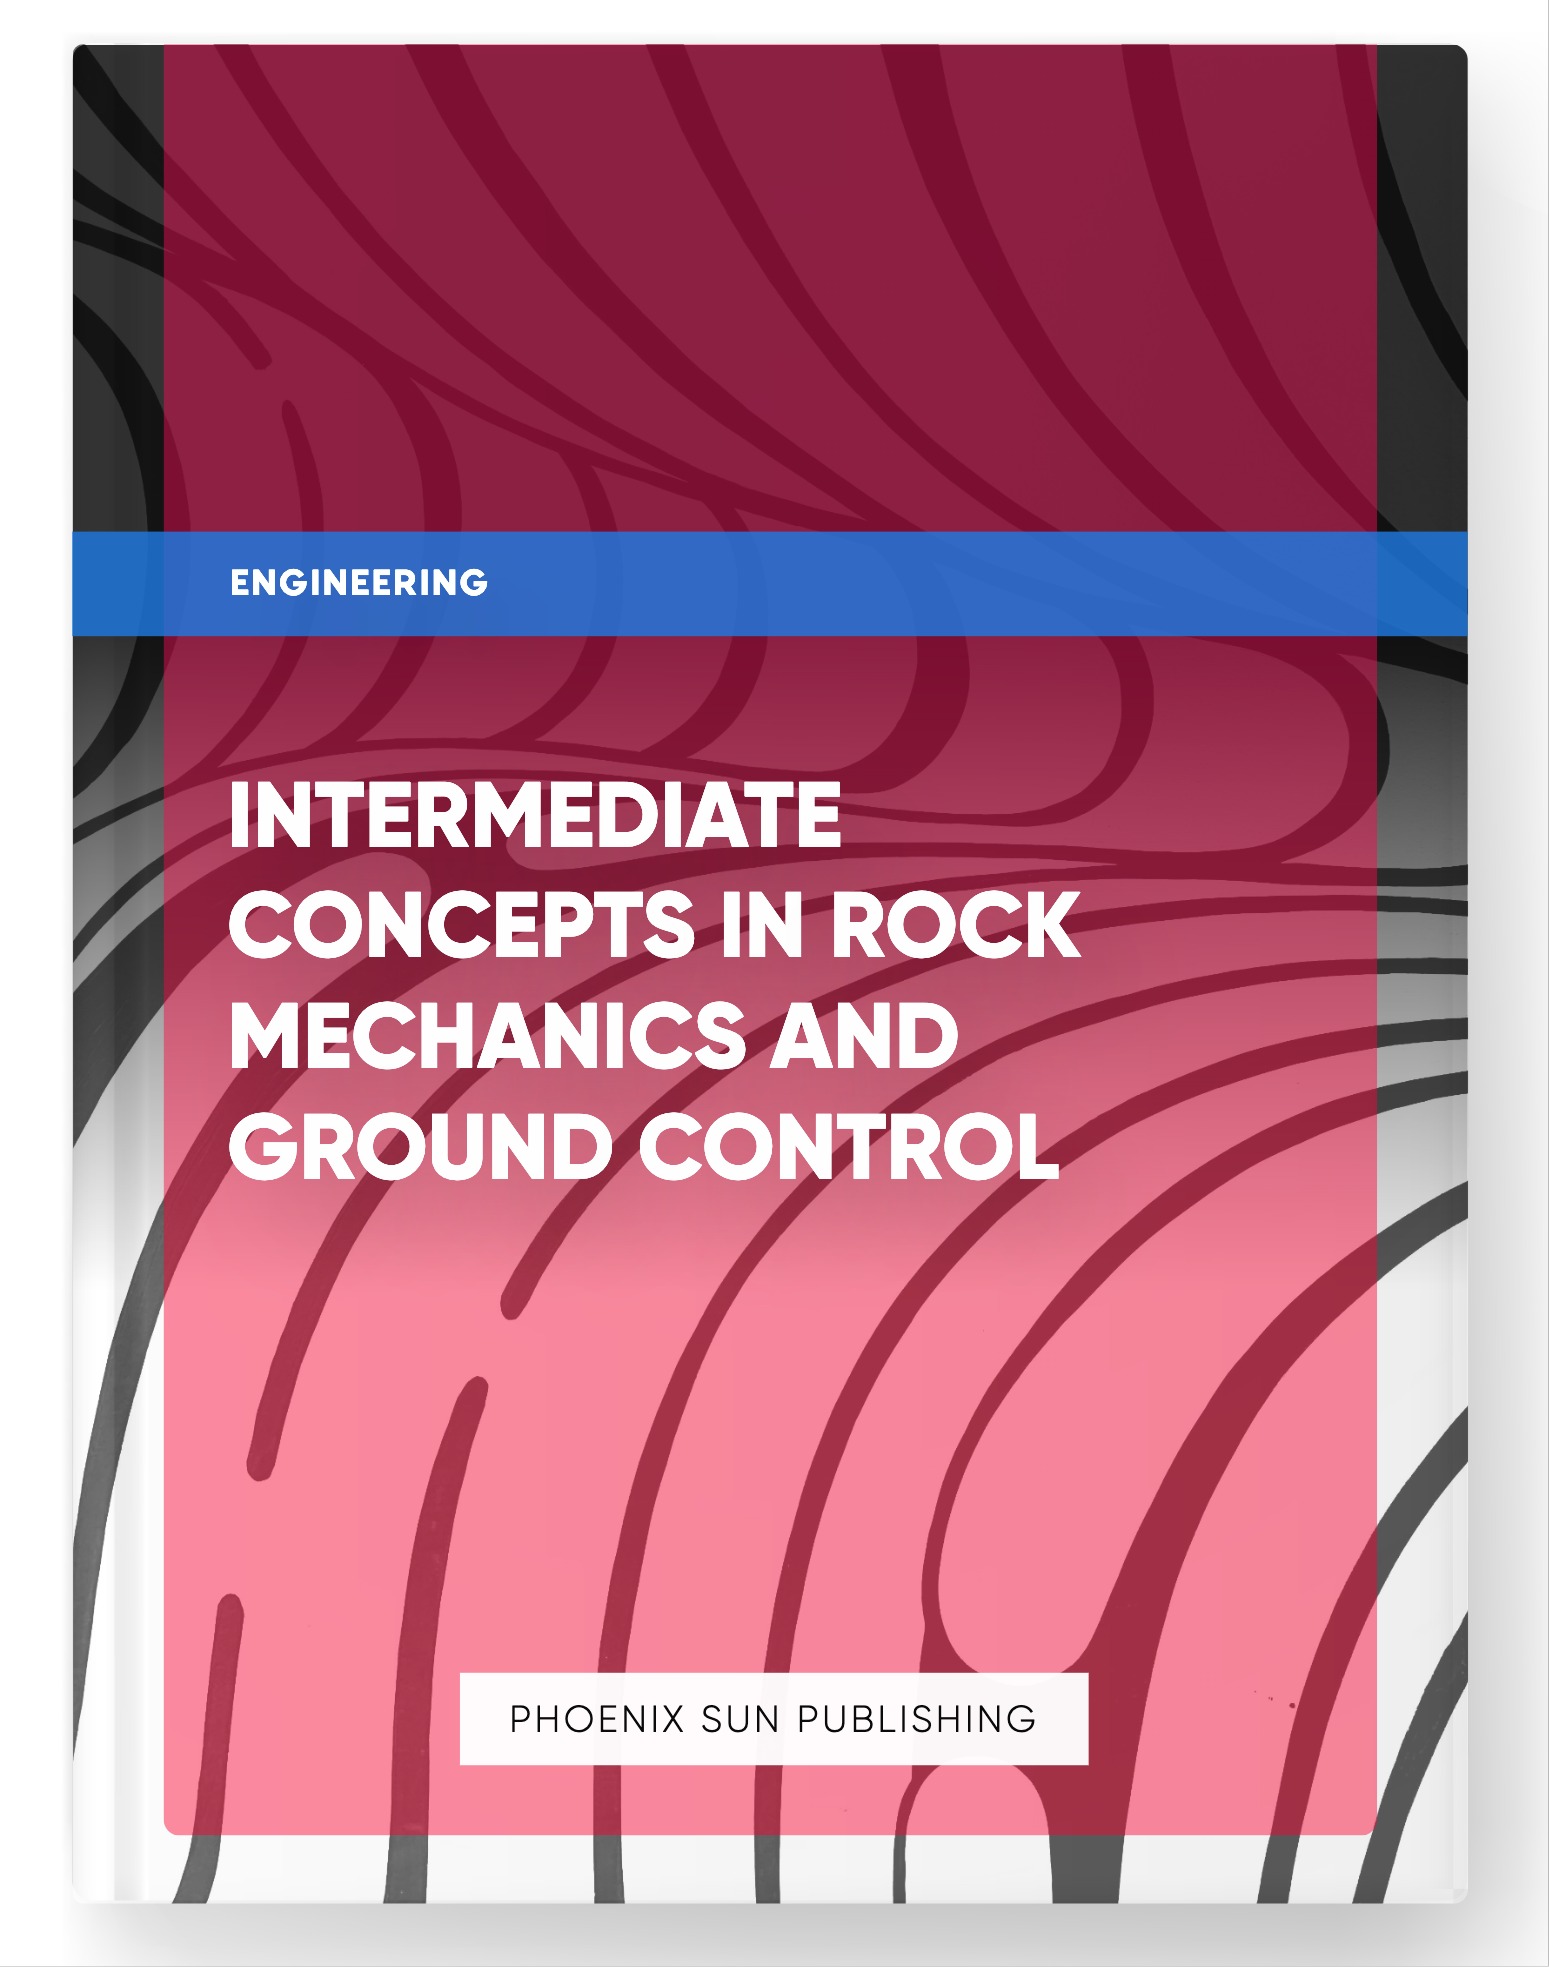 Intermediate Concepts in Rock Mechanics and Ground Control